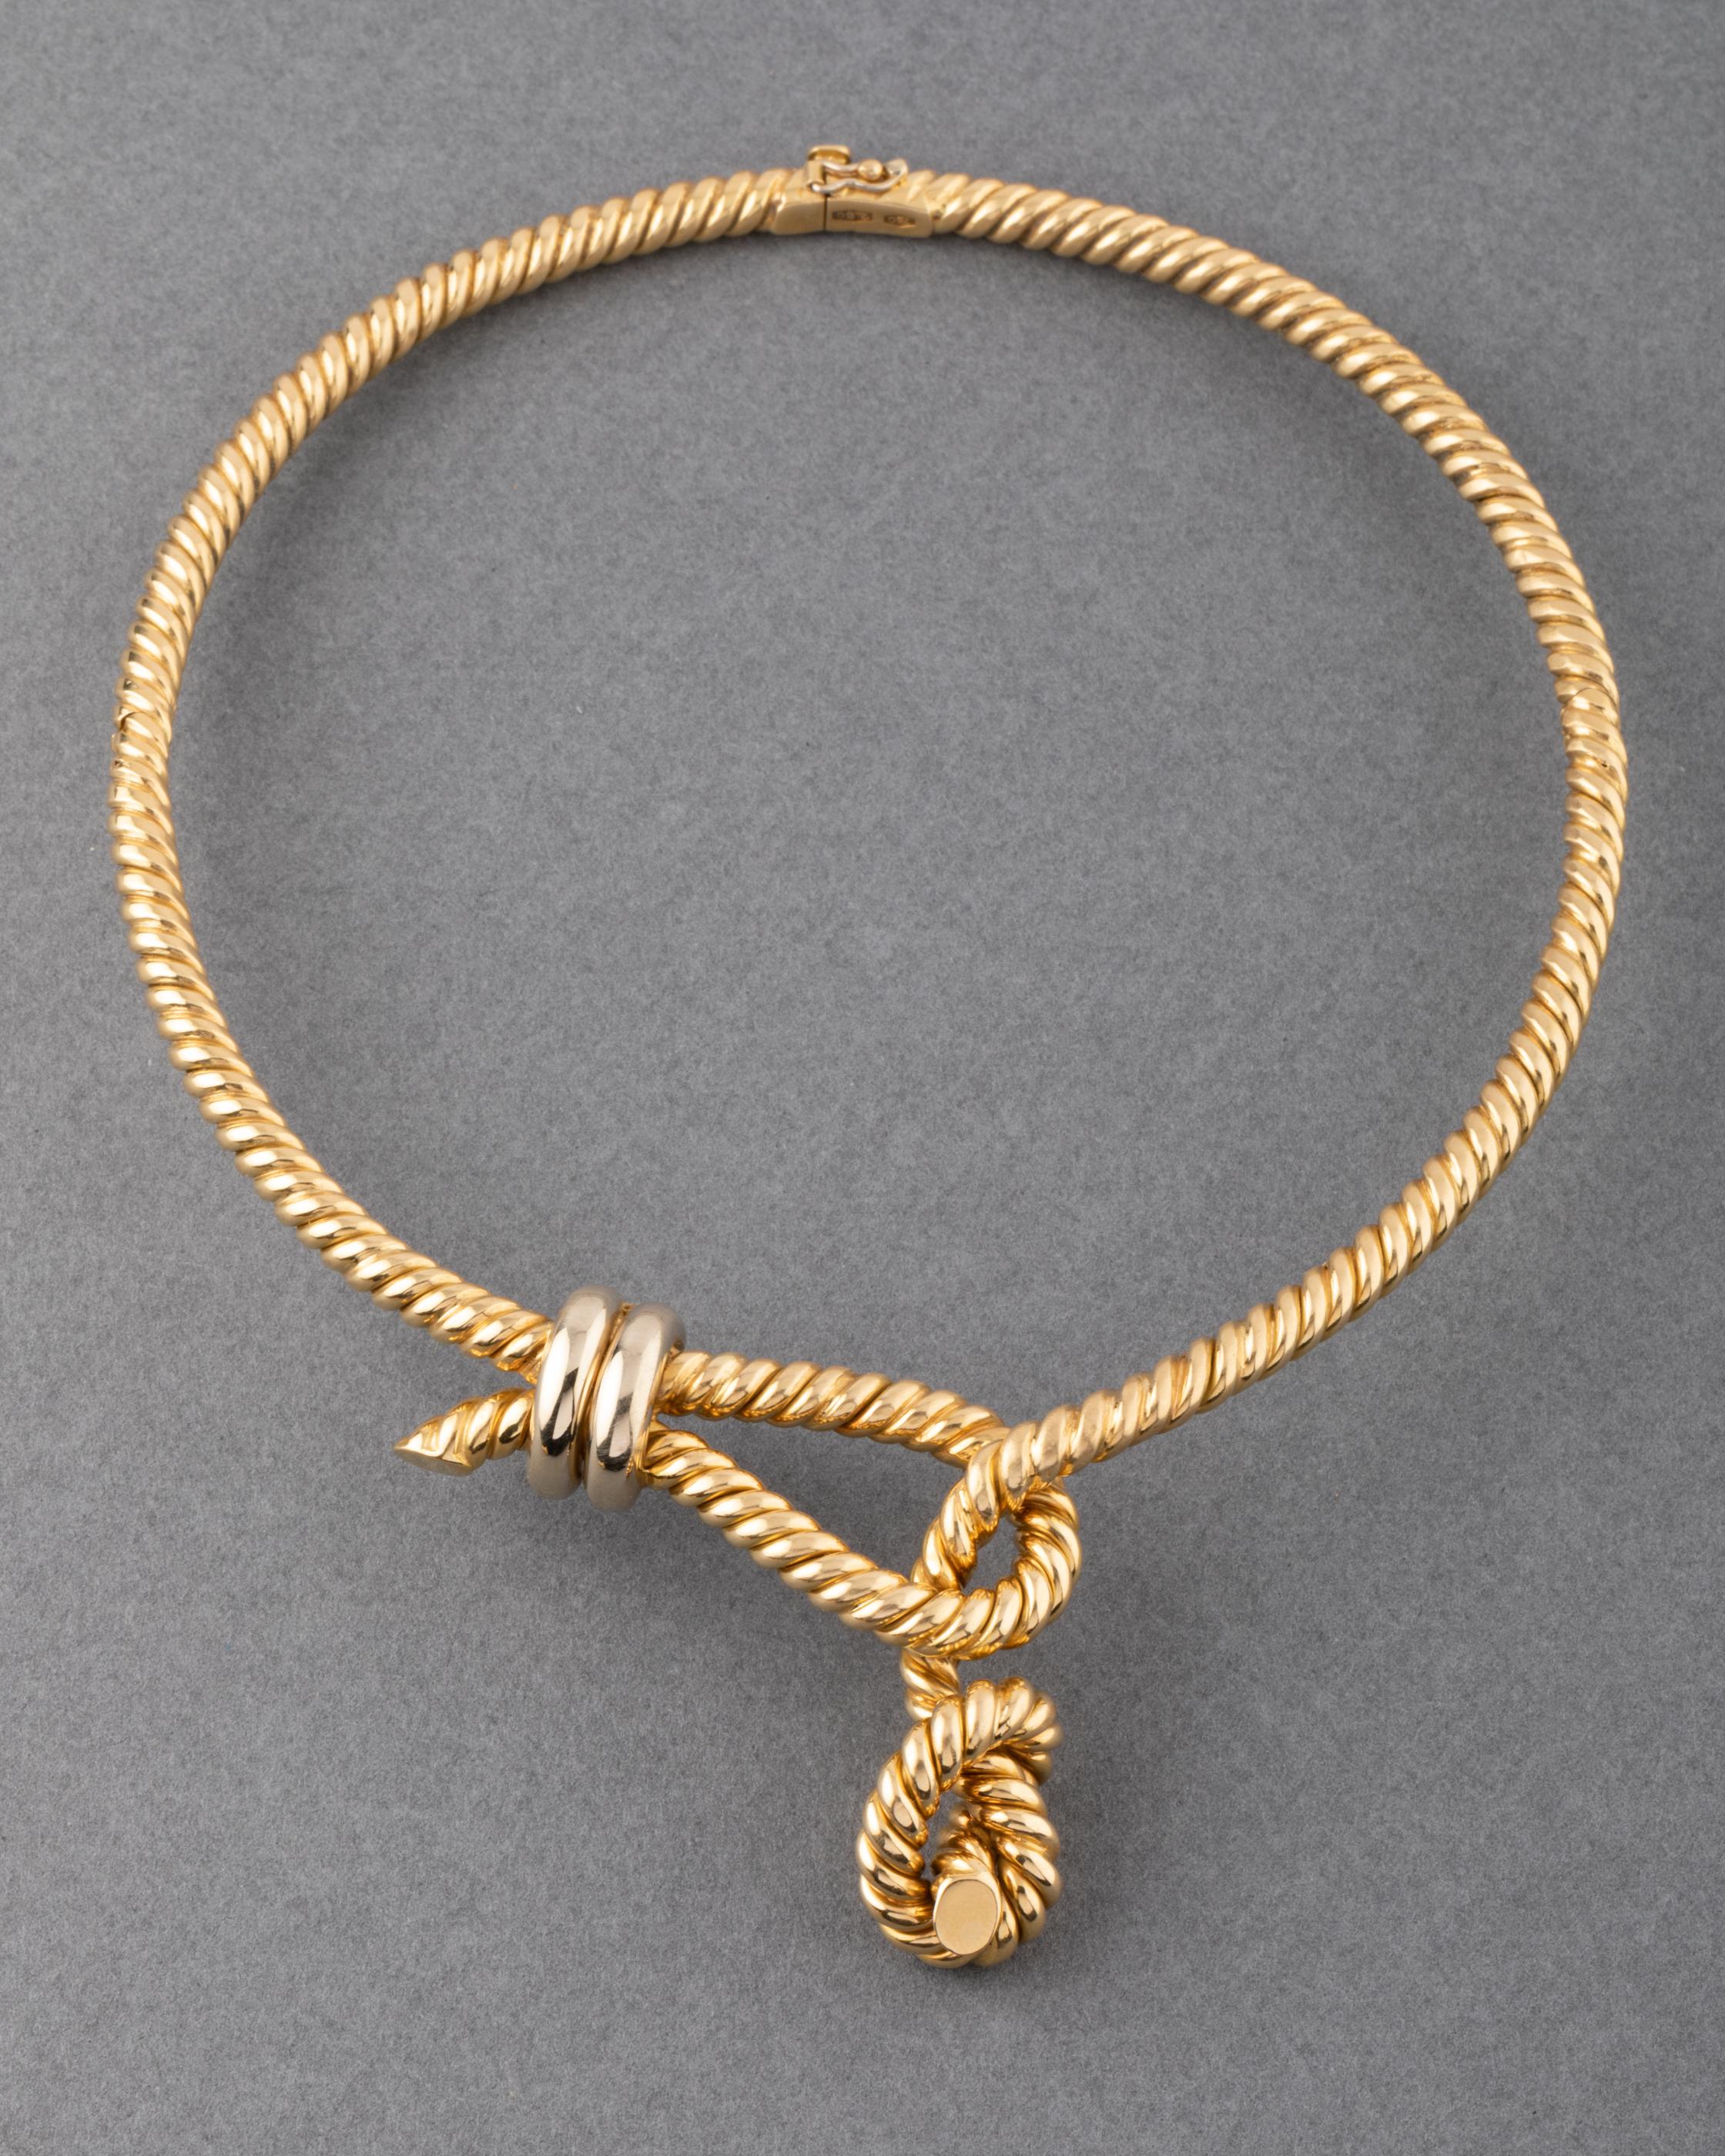 One elegant vintage necklace, made in yellow gold 18k.

Italian made (multiple hallmarks) circa 1960.

Total weight: 48.10 grams

The length is 38 cm